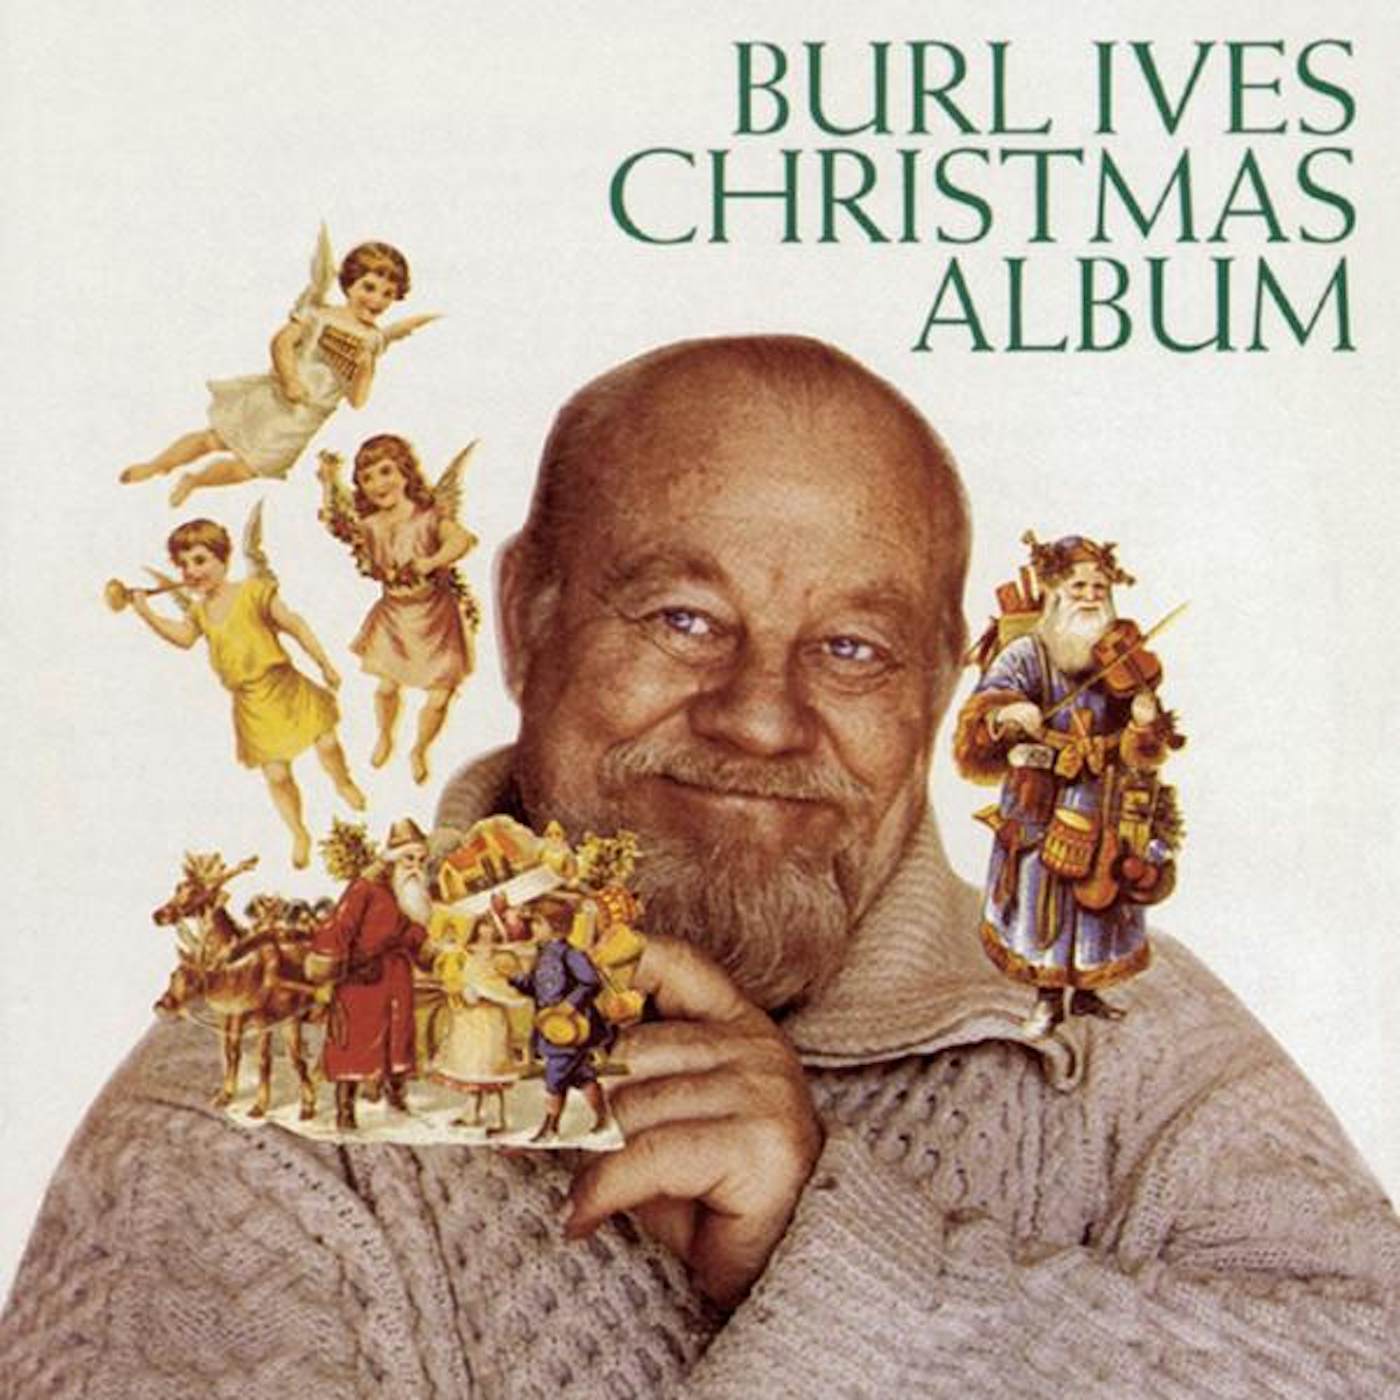 Burl Ives Christmas Album [Sony Special Products] CD